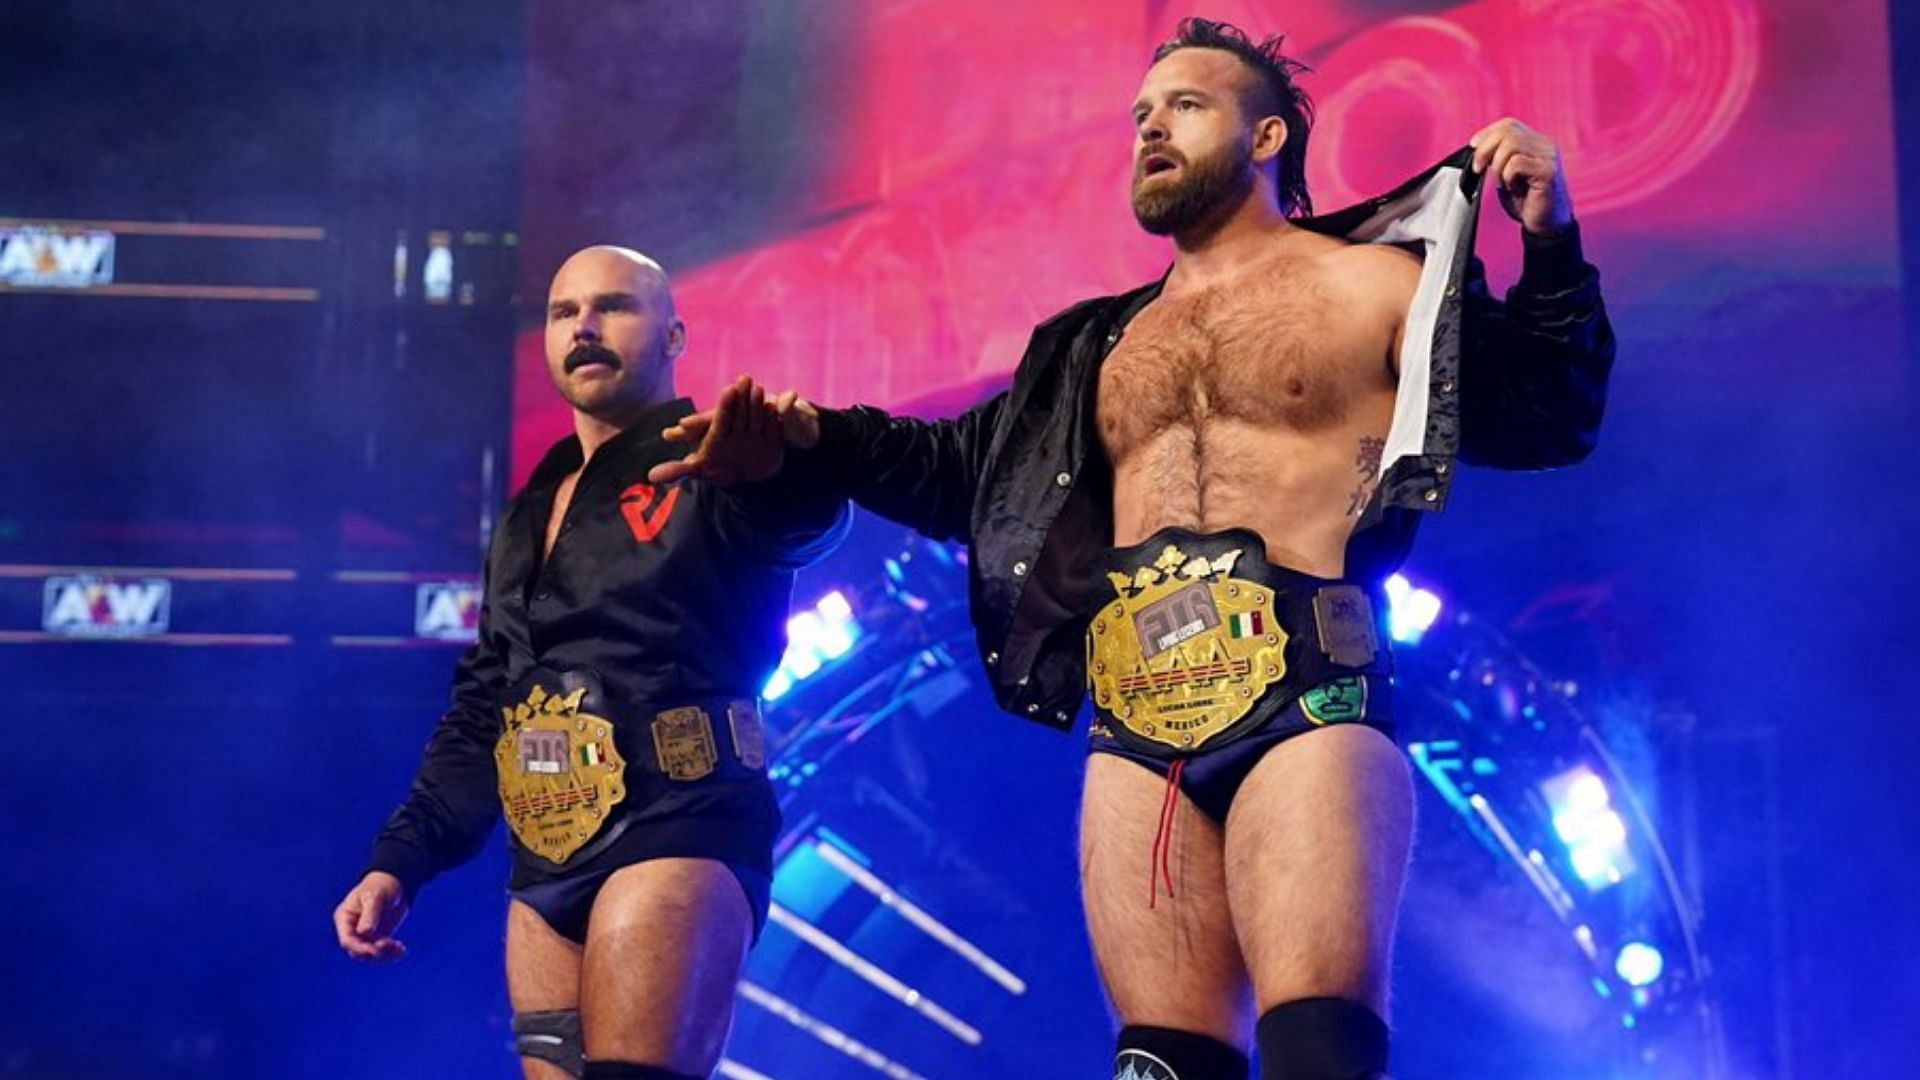 FTR making their entrance at an AEW Dark: Elevation event in 2021